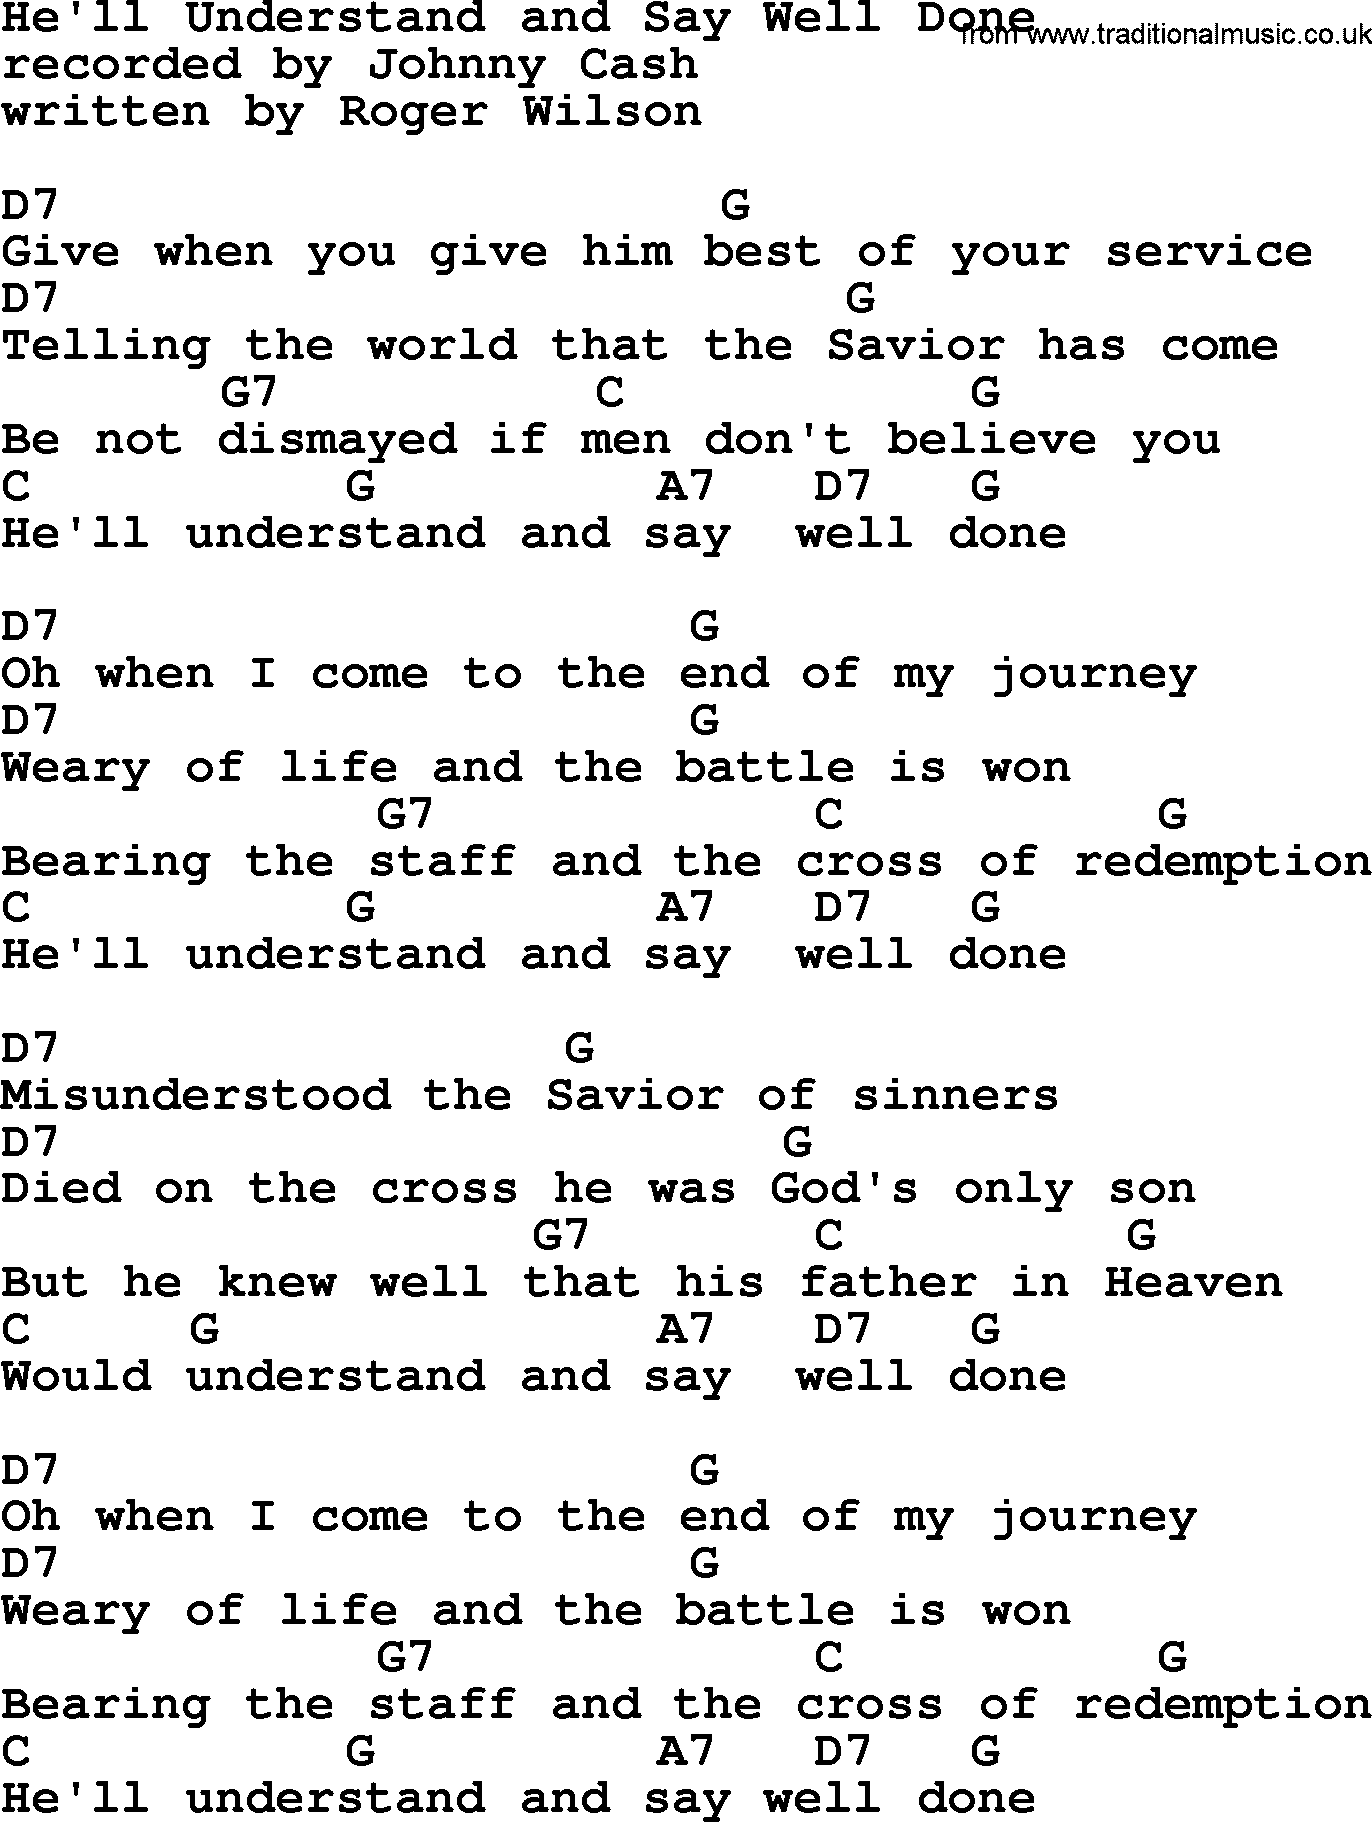 Johnny Cash song He'll Understand And Say Well Done, lyrics and chords